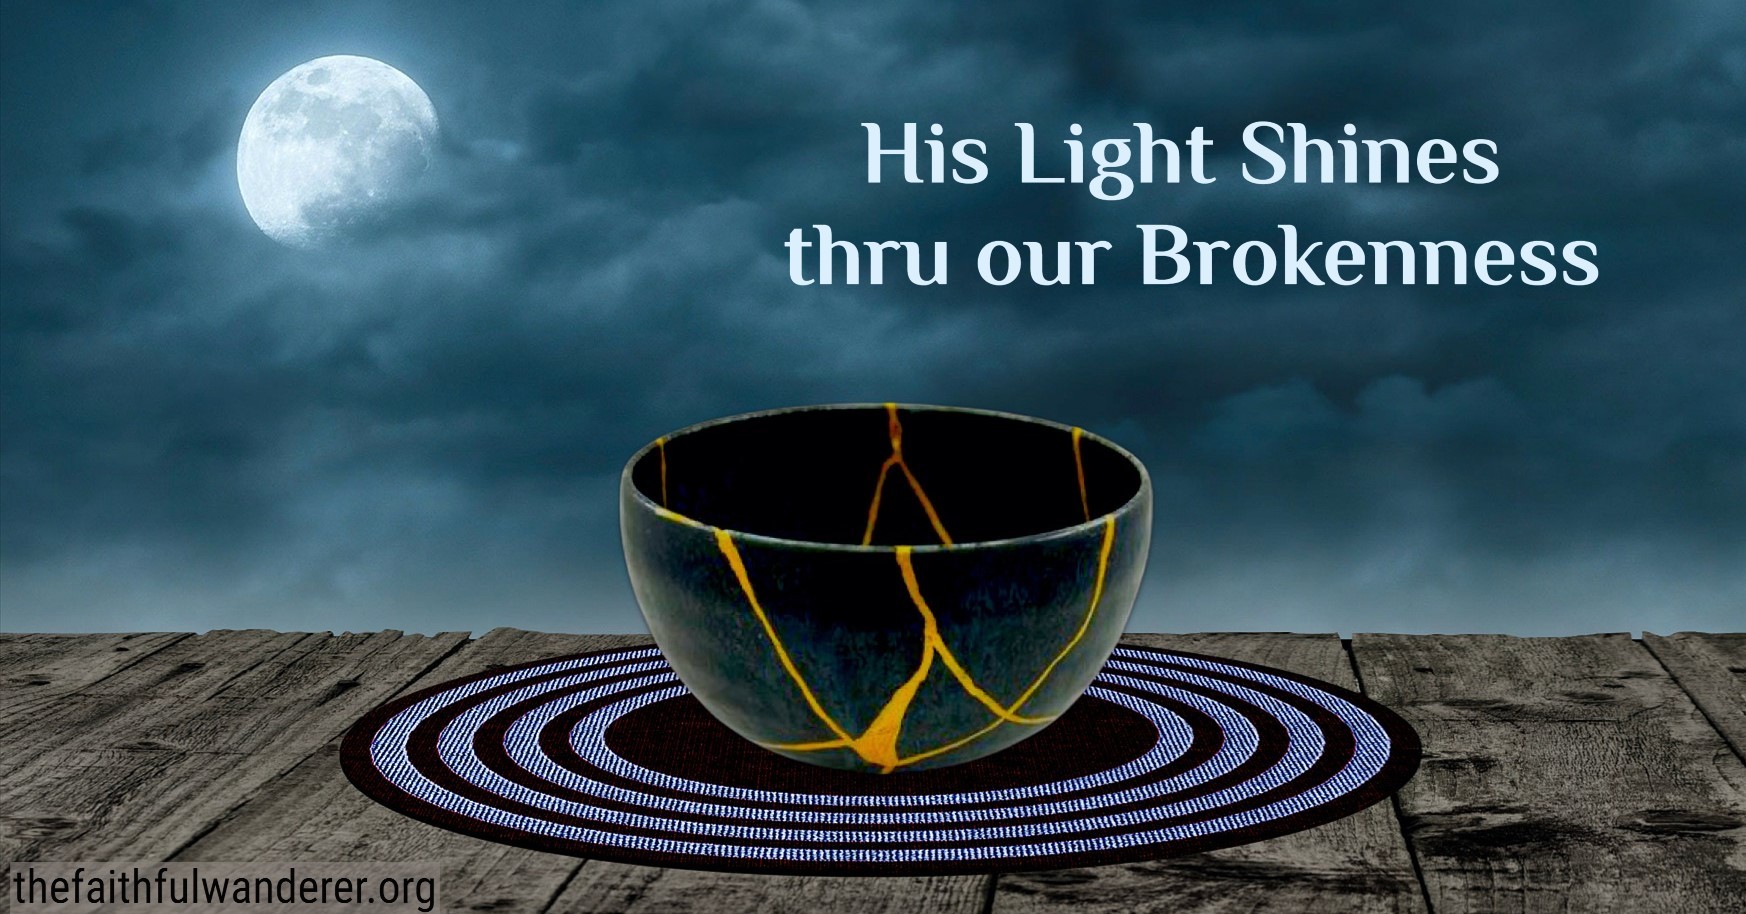 His Light Shines thru our Brokenness